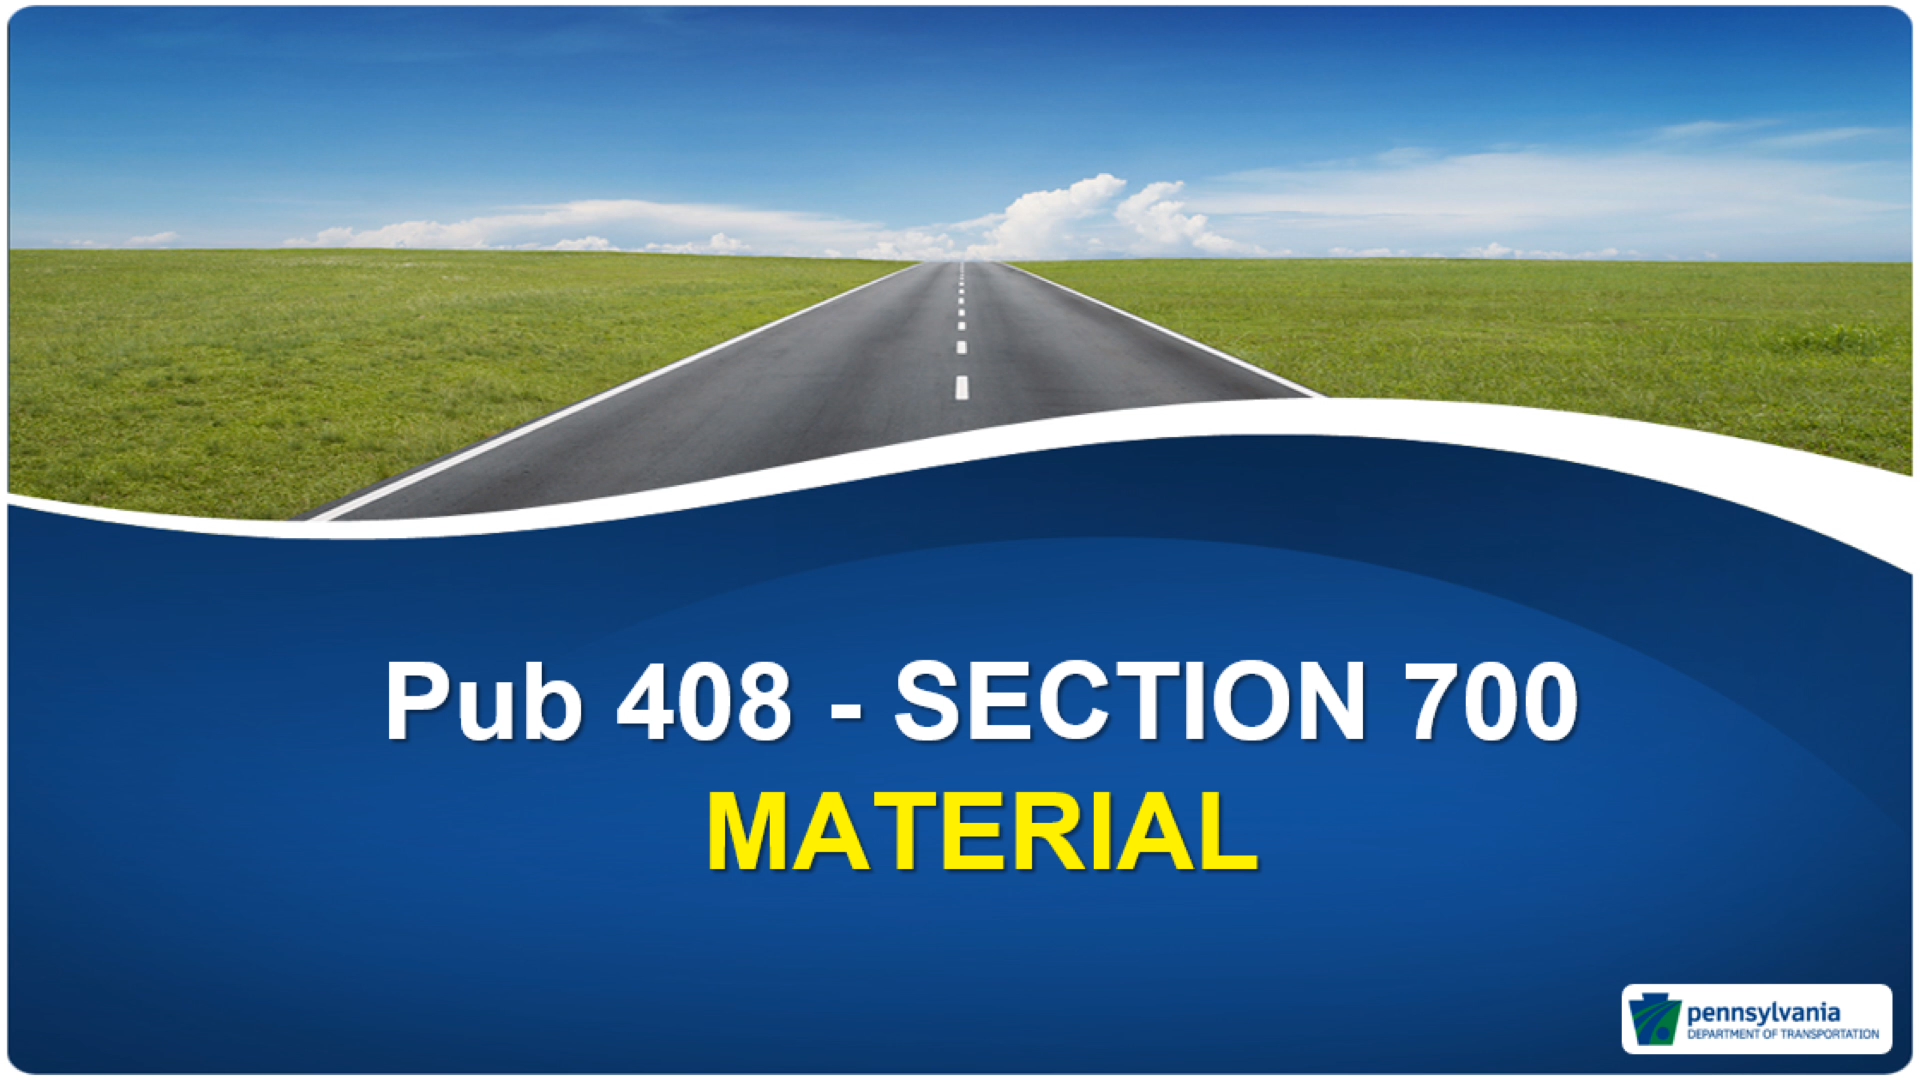 Section 700